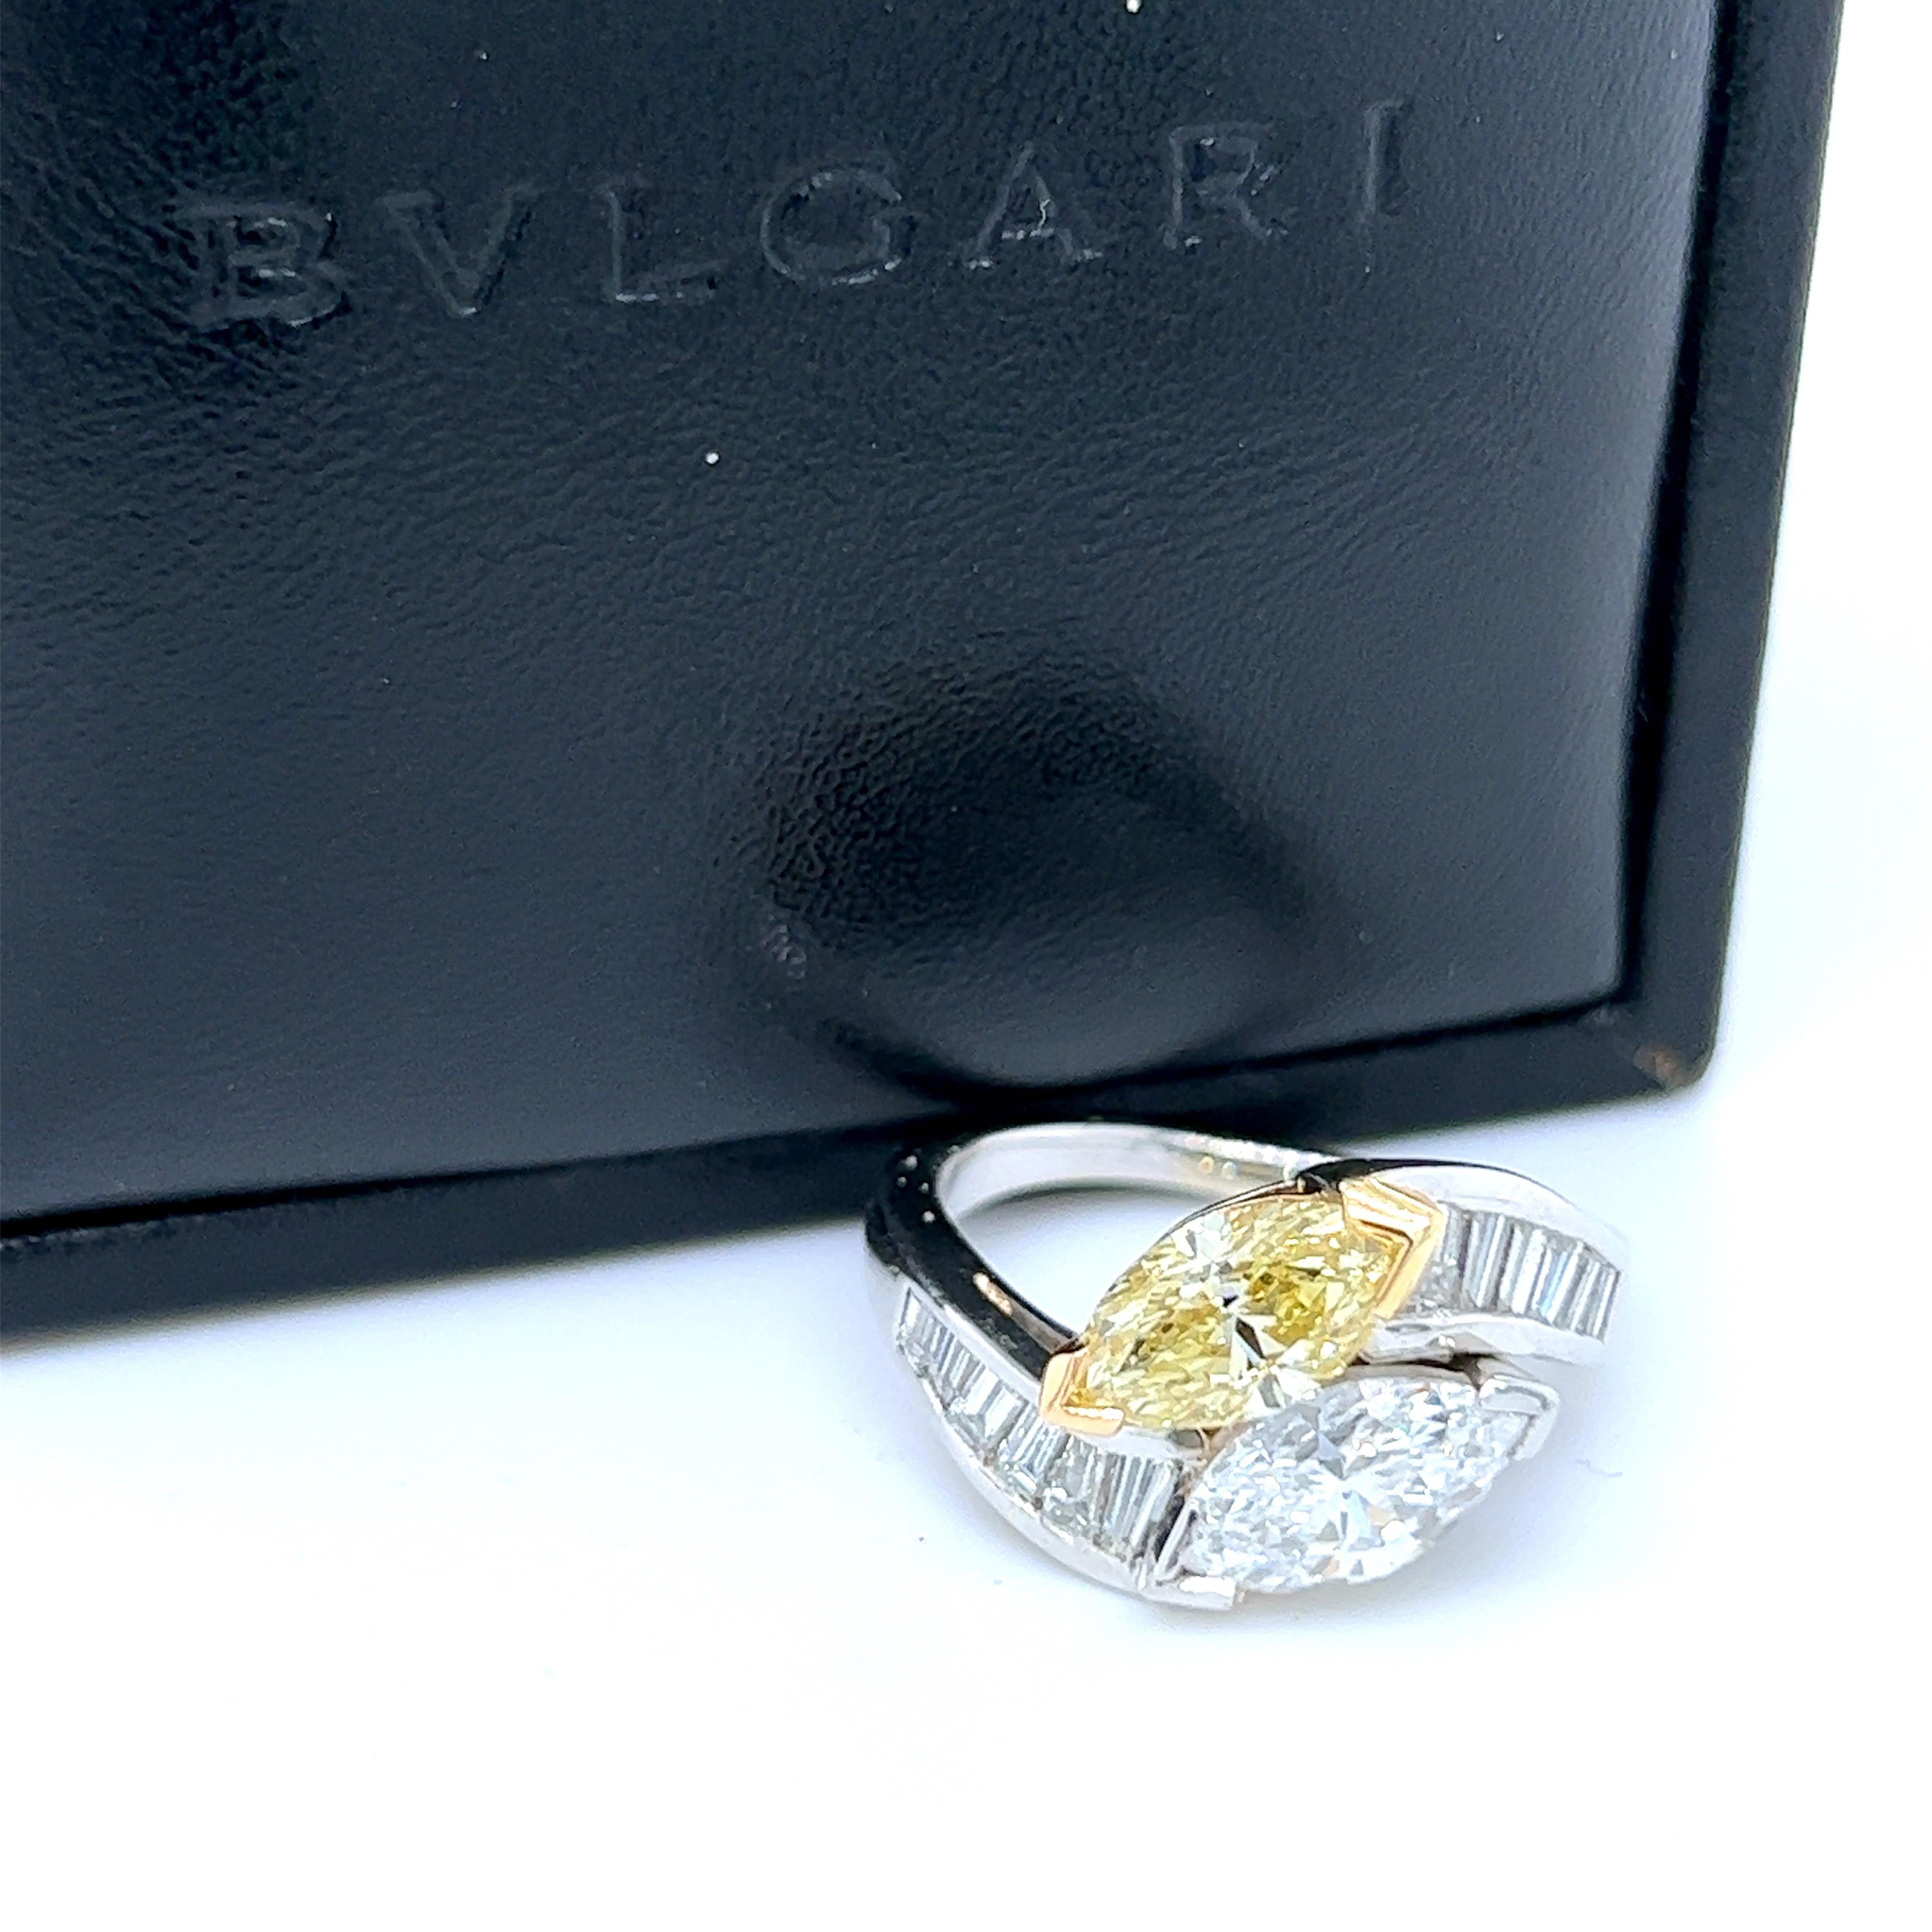 Original 1980 BULGARI Toi et Moi Ring featuring two top quality GIA Certified Extraordinary Marquise Cut Diamond in a Diamond Baguette Cut Platinum setting, adding an extra touch of allure to this extraordinary piece.
As stated in rare two GIA New